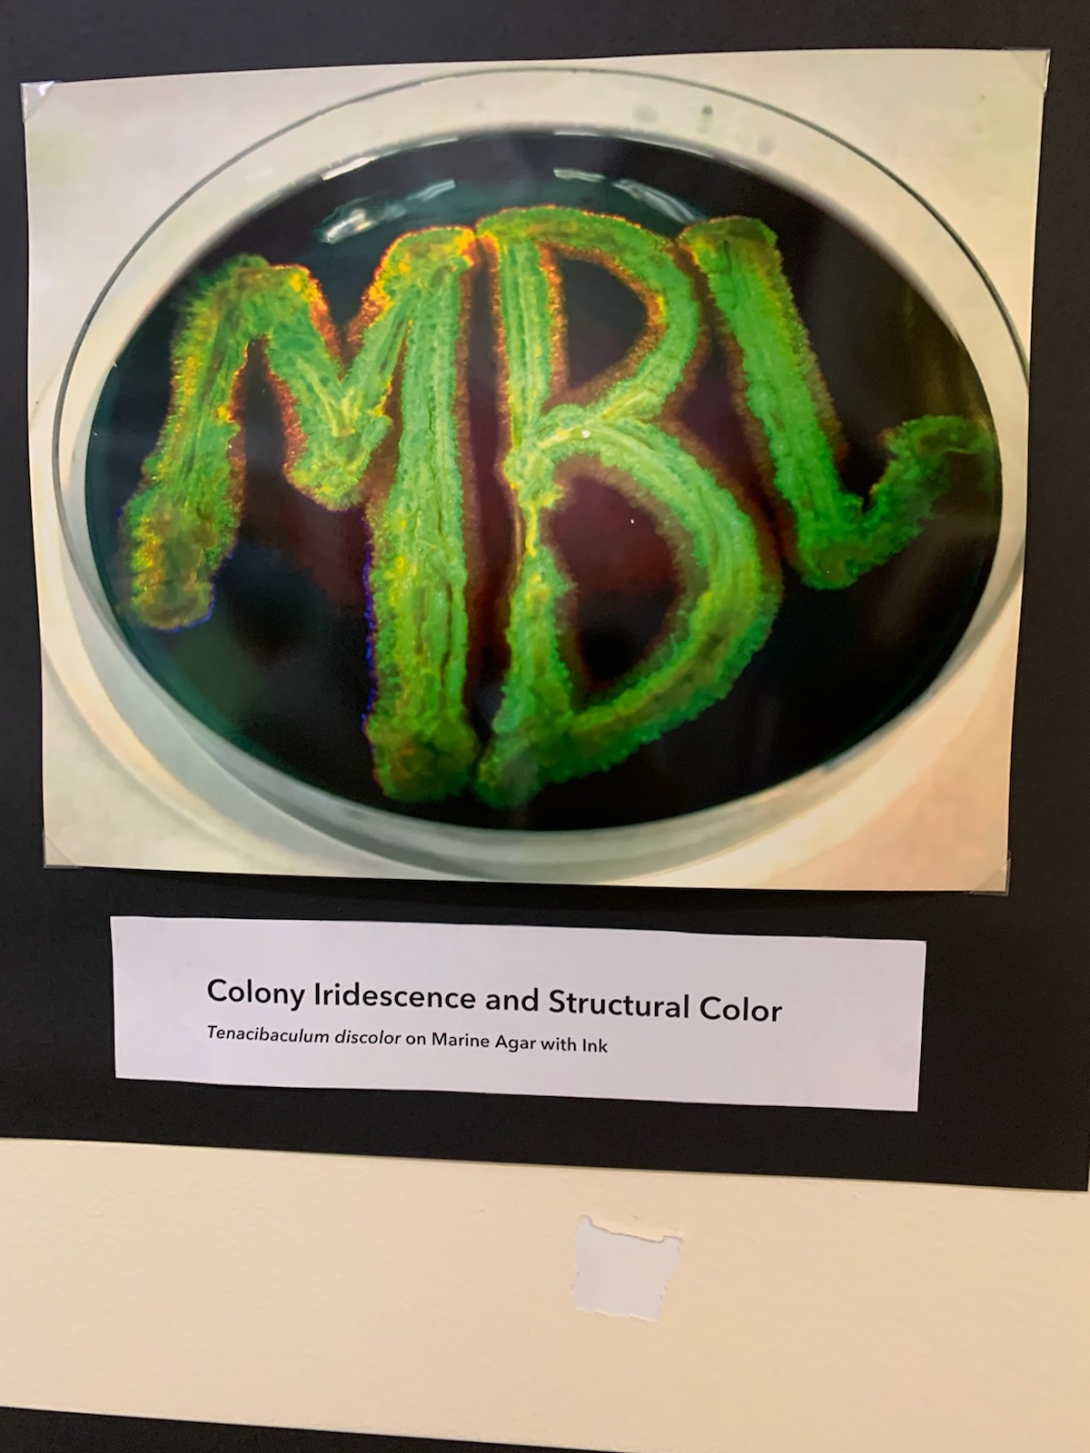 MBL spelled out in Agar on a petri dish